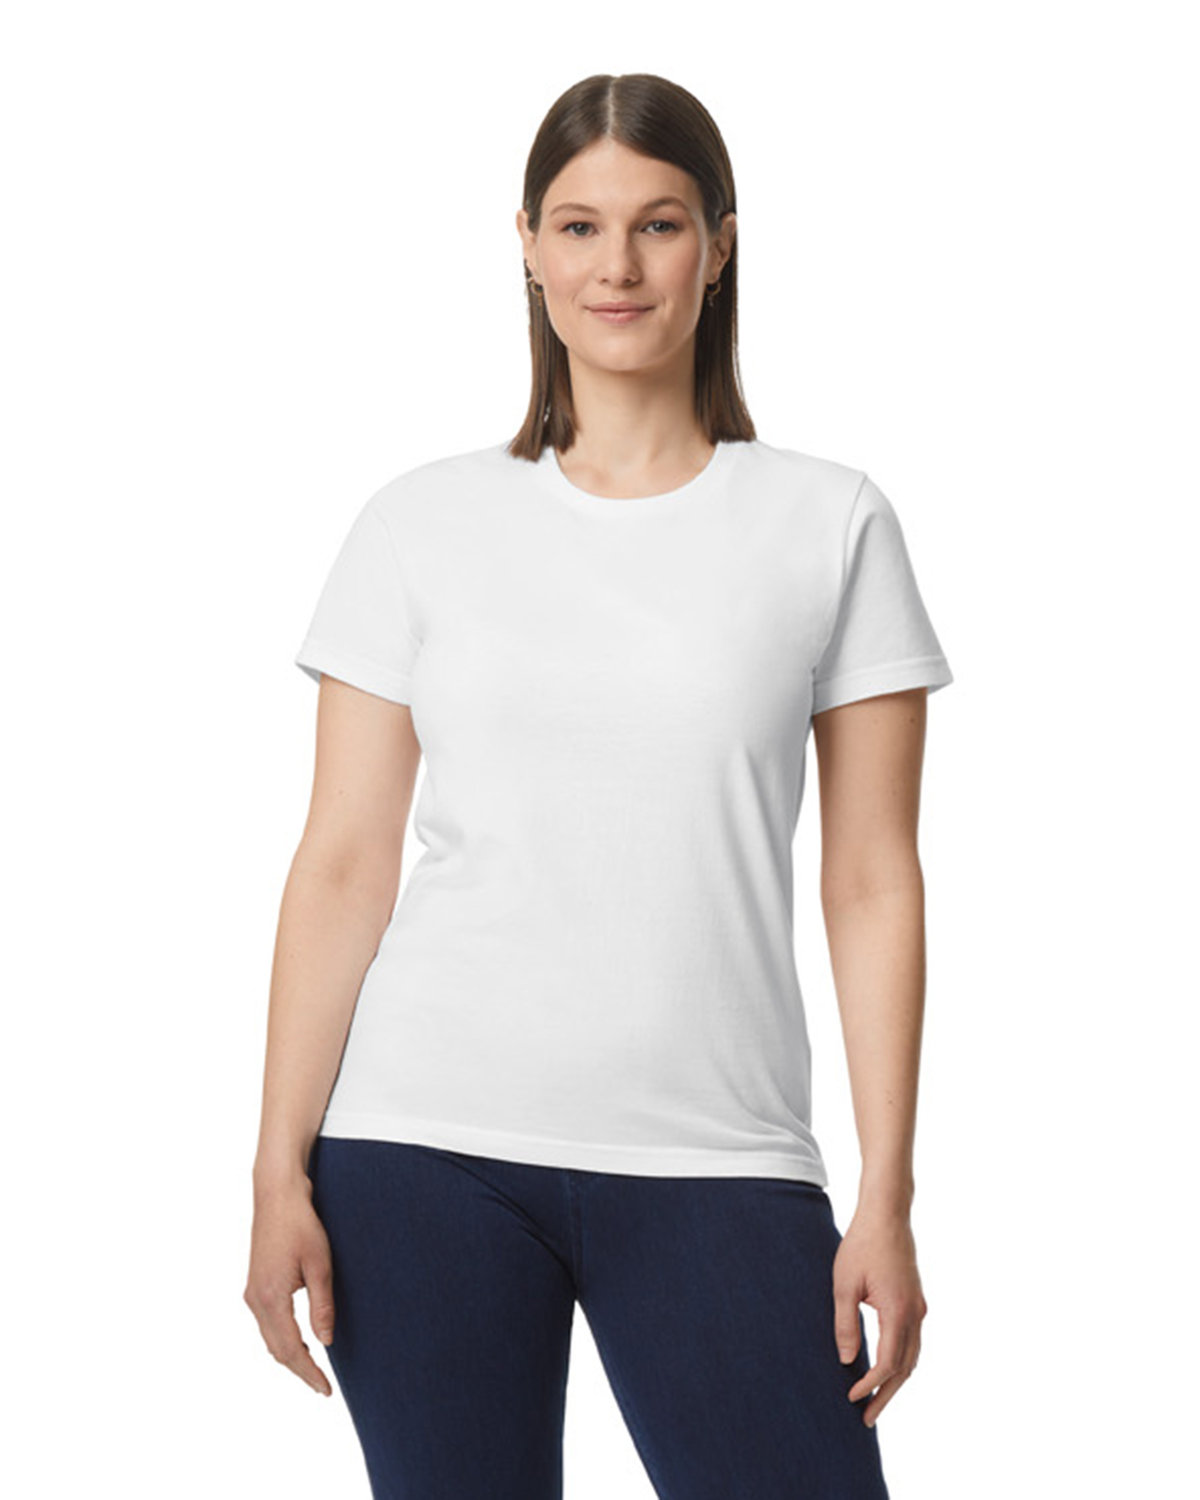 Picture of Gildan Women's Softstyle Midweight Ladies' T-Shirt